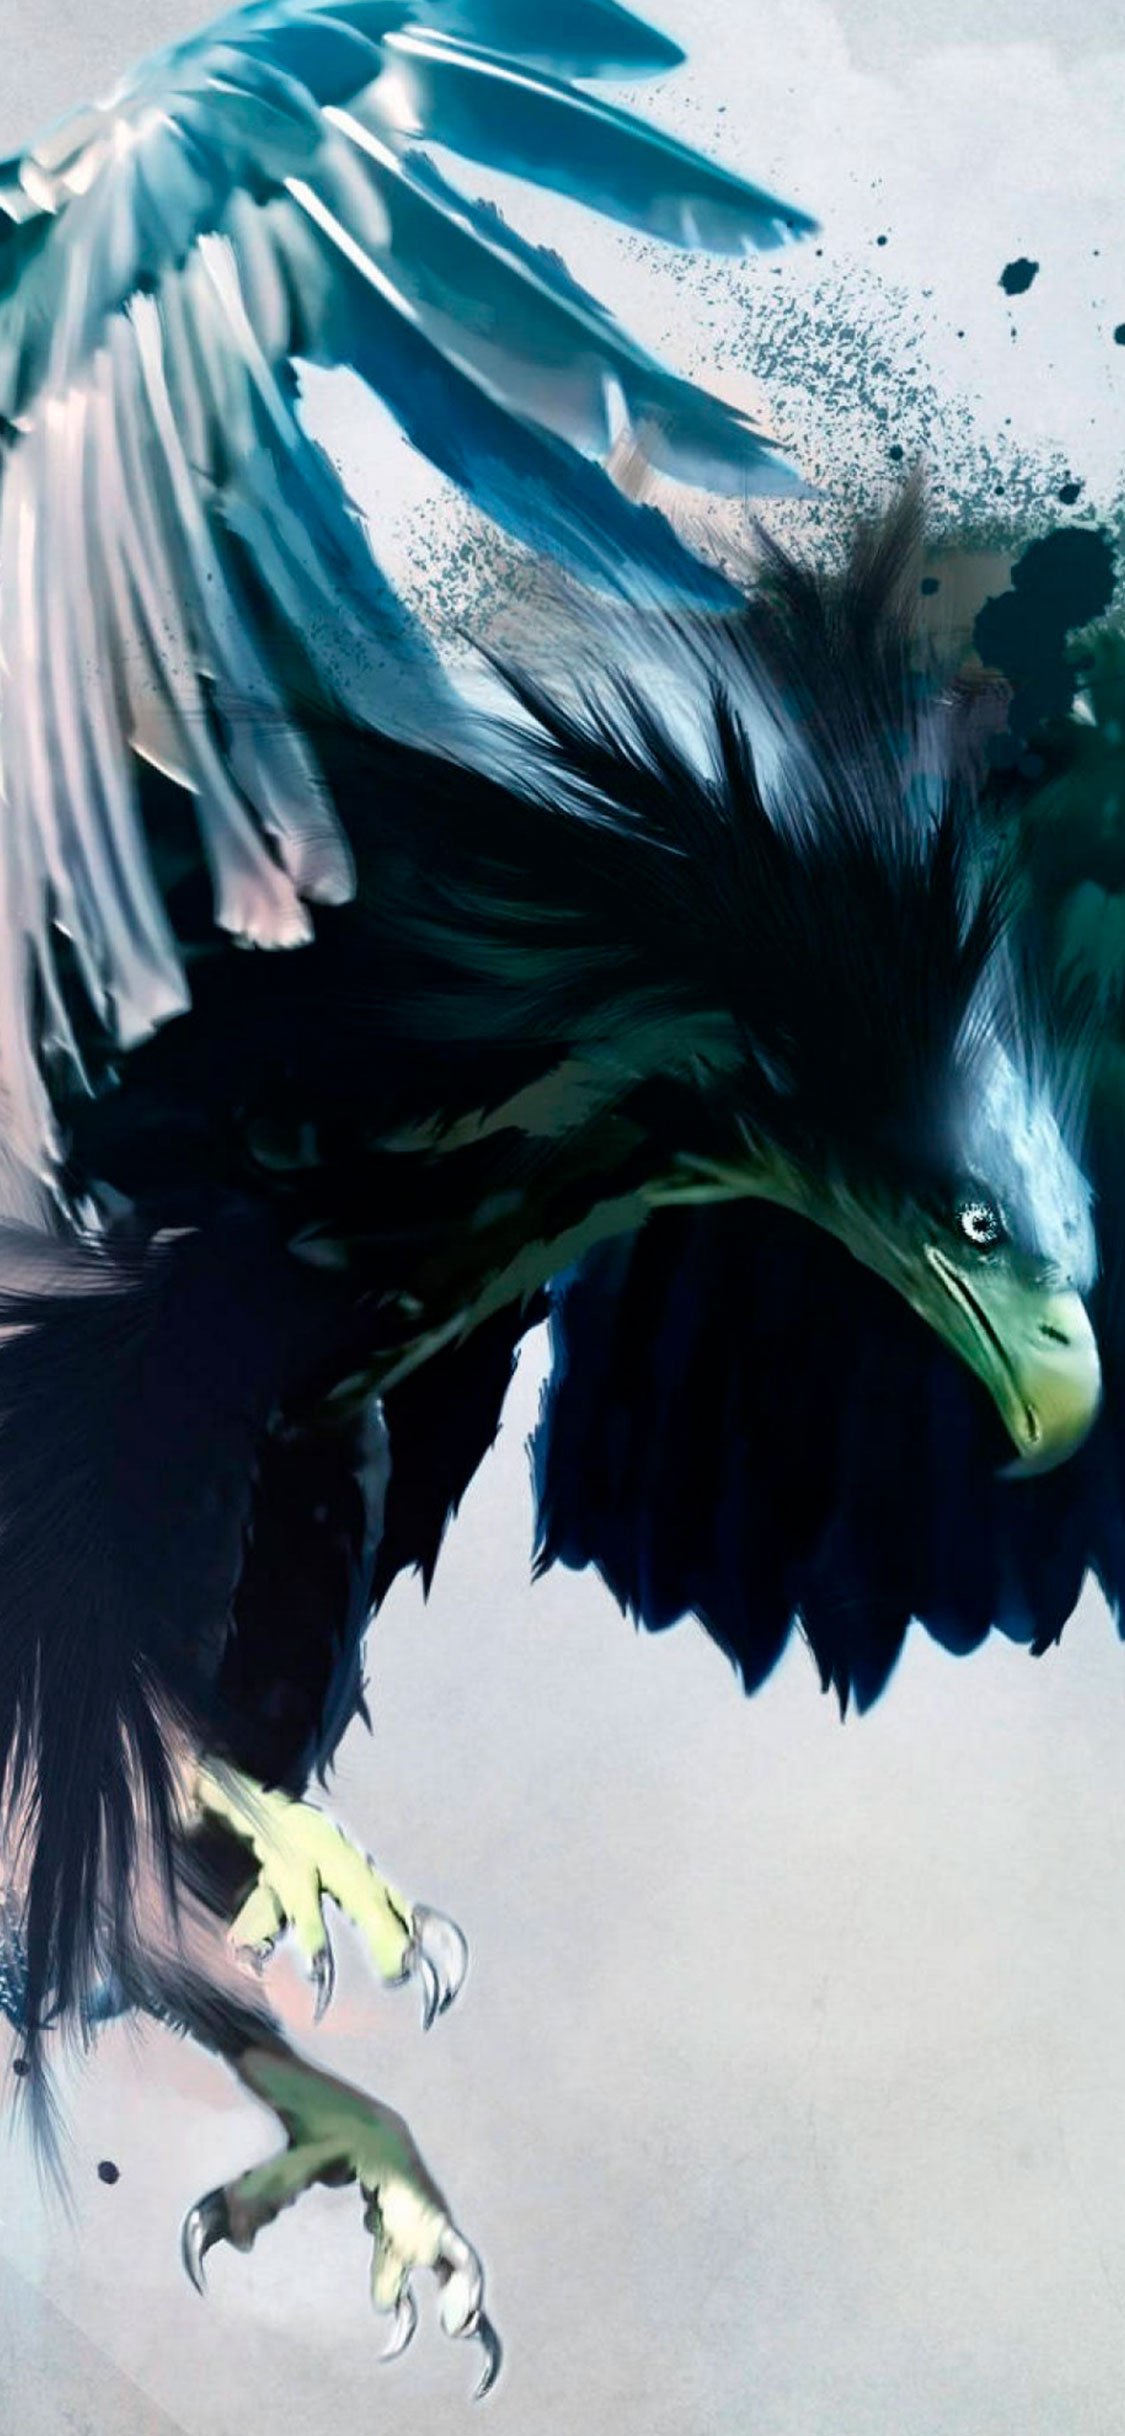 Eagle Wallpapers - Top 35 Best Eagle Backgrounds Download